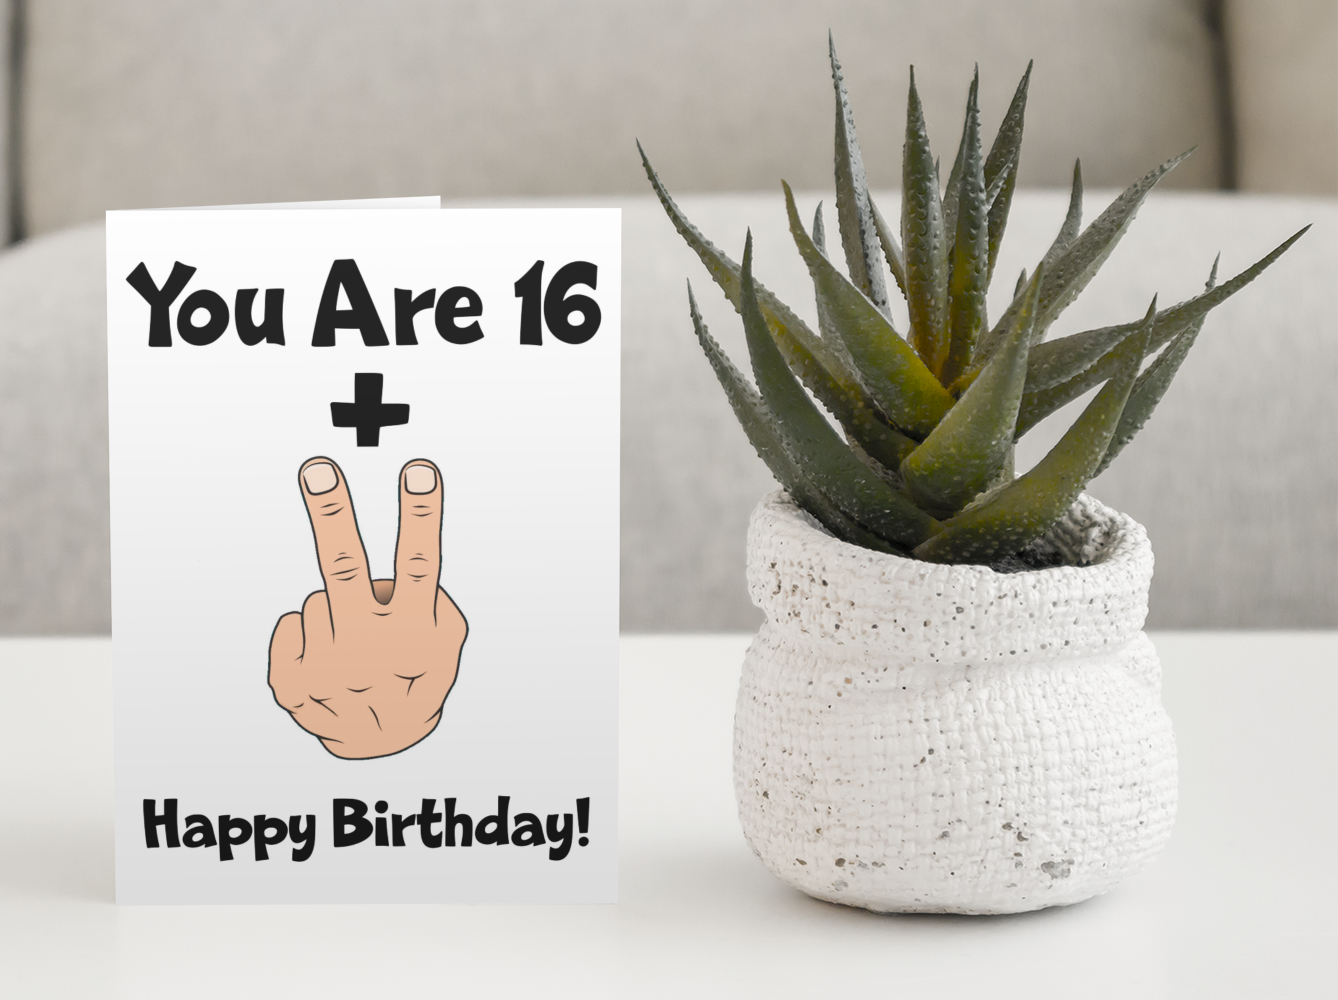 18th Birthday Card Gift - You Are 16 Plus Two Fingers - Funny Cute Rude Teenager Birthday Present